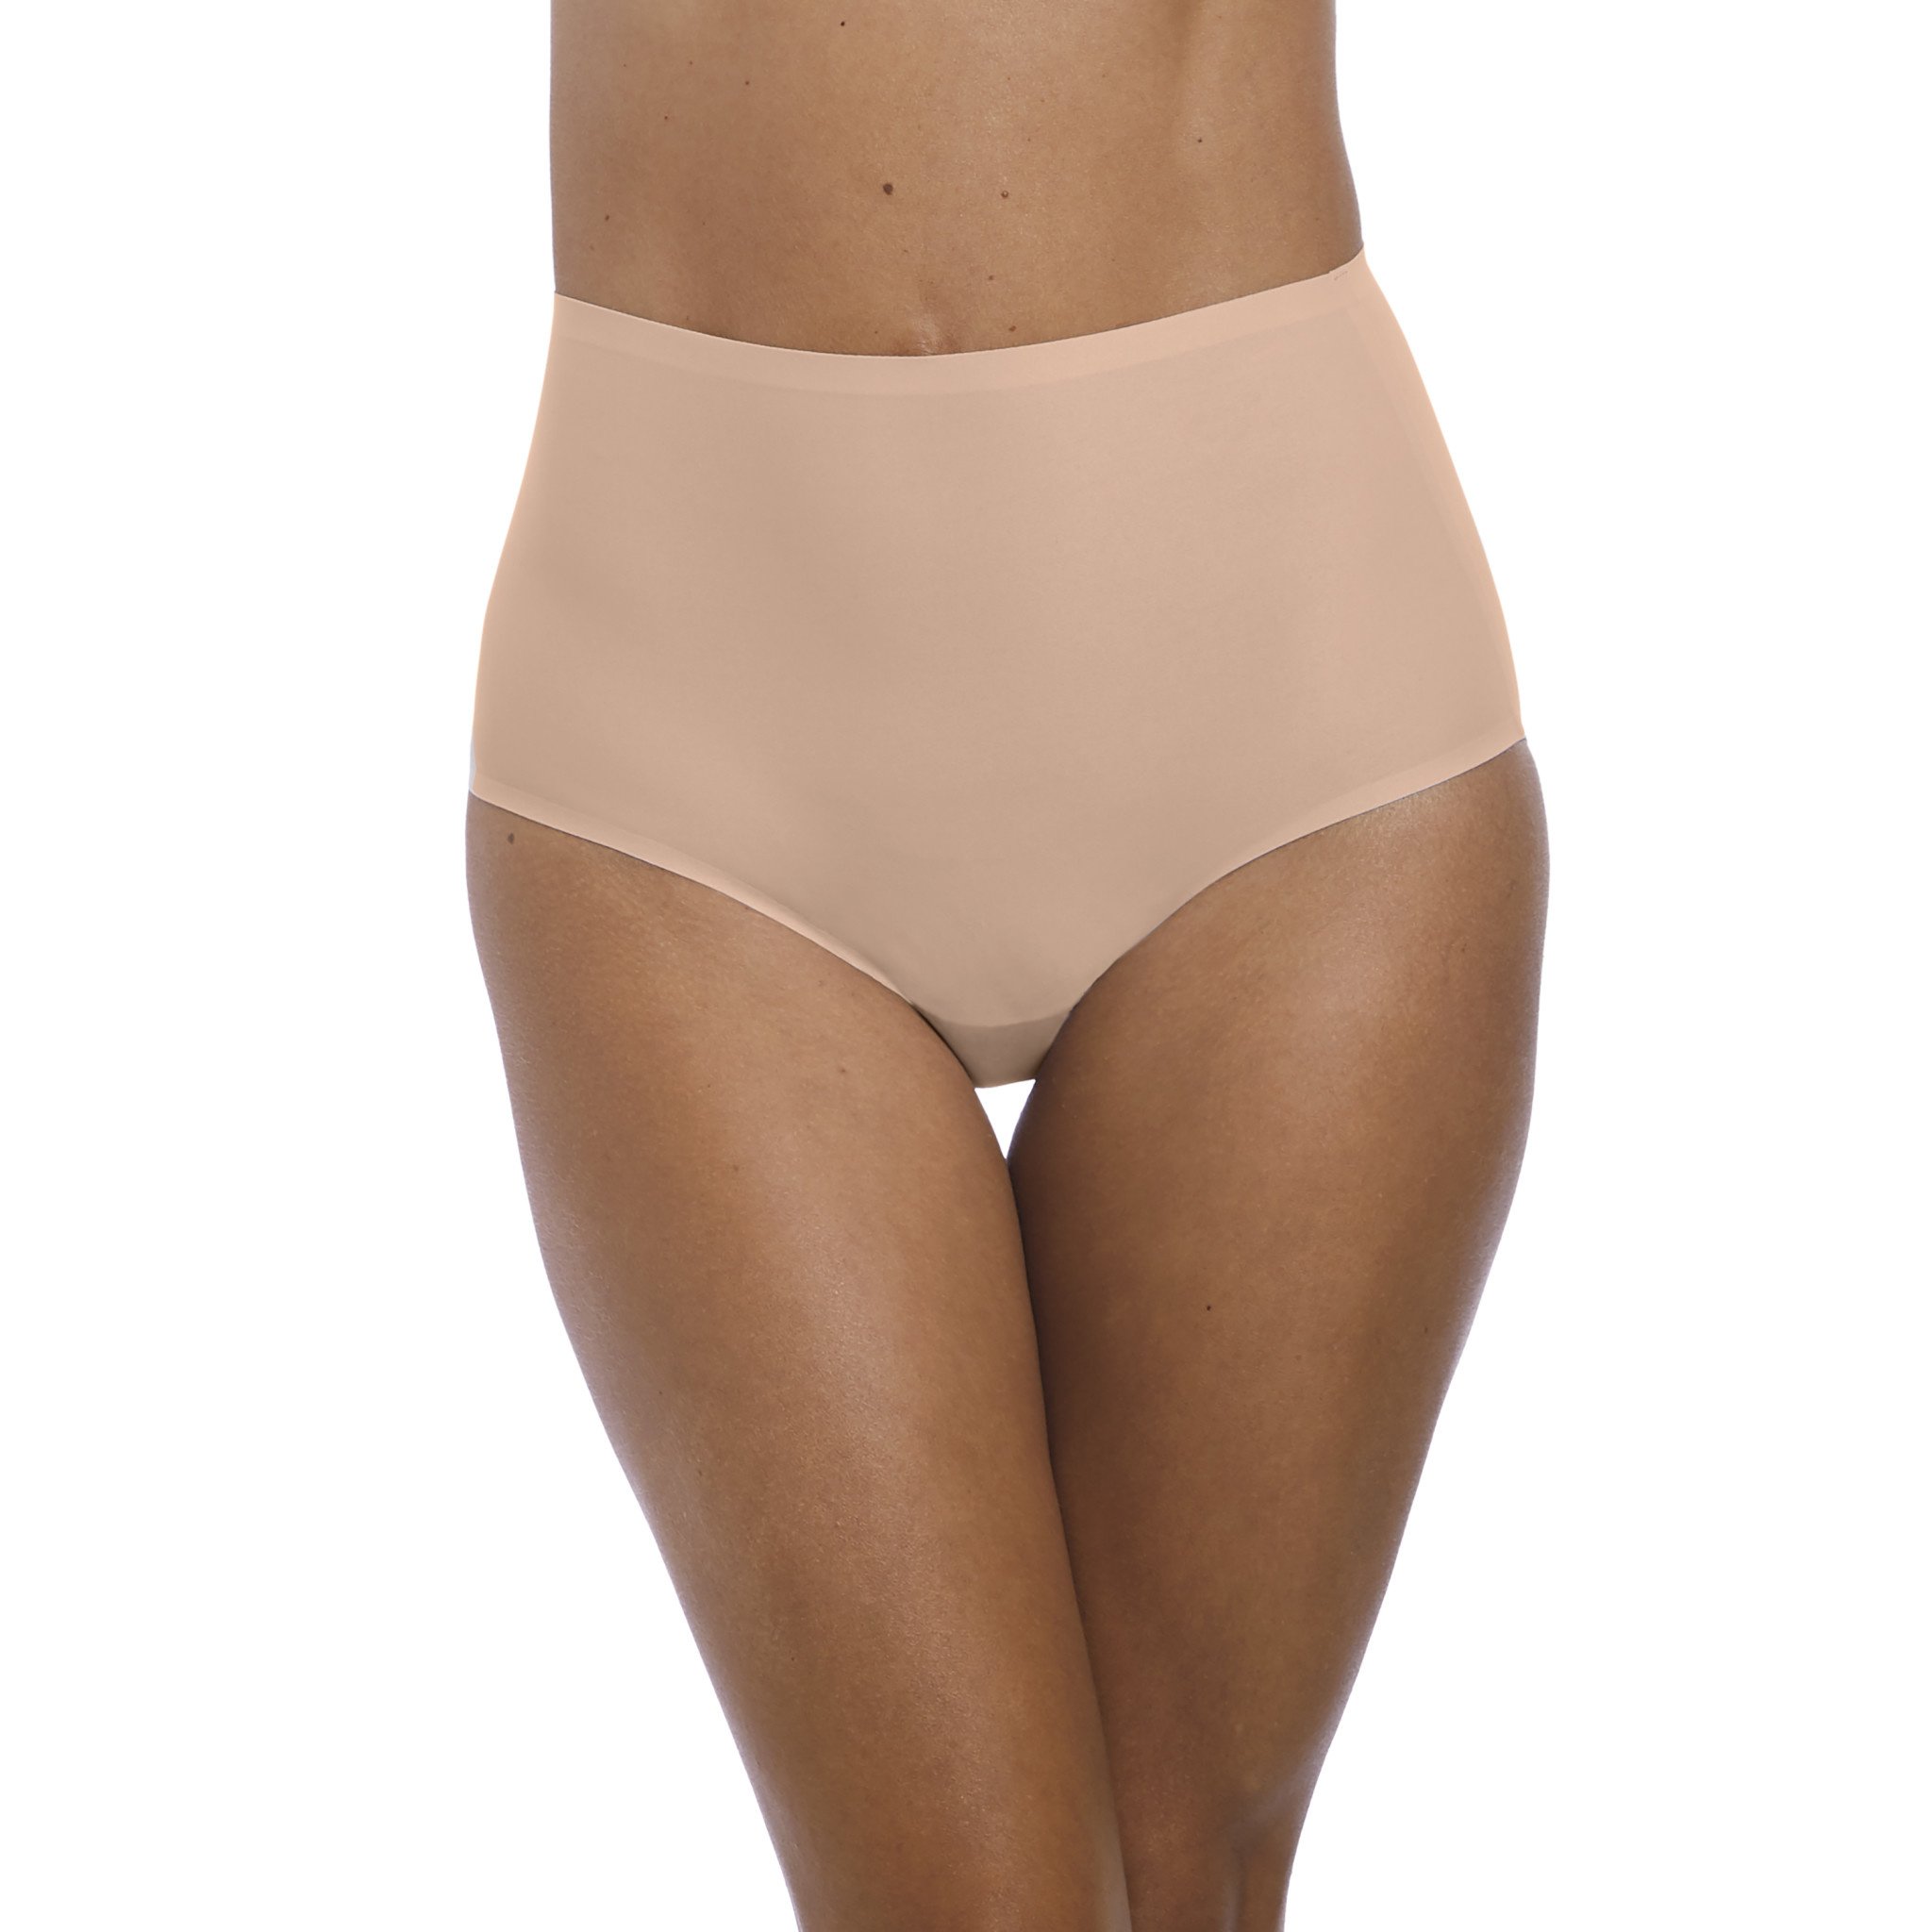  Fantasie womens Smoothease Seamless Mid-rise Briefs, Ivory, One  Size US : Clothing, Shoes & Jewelry